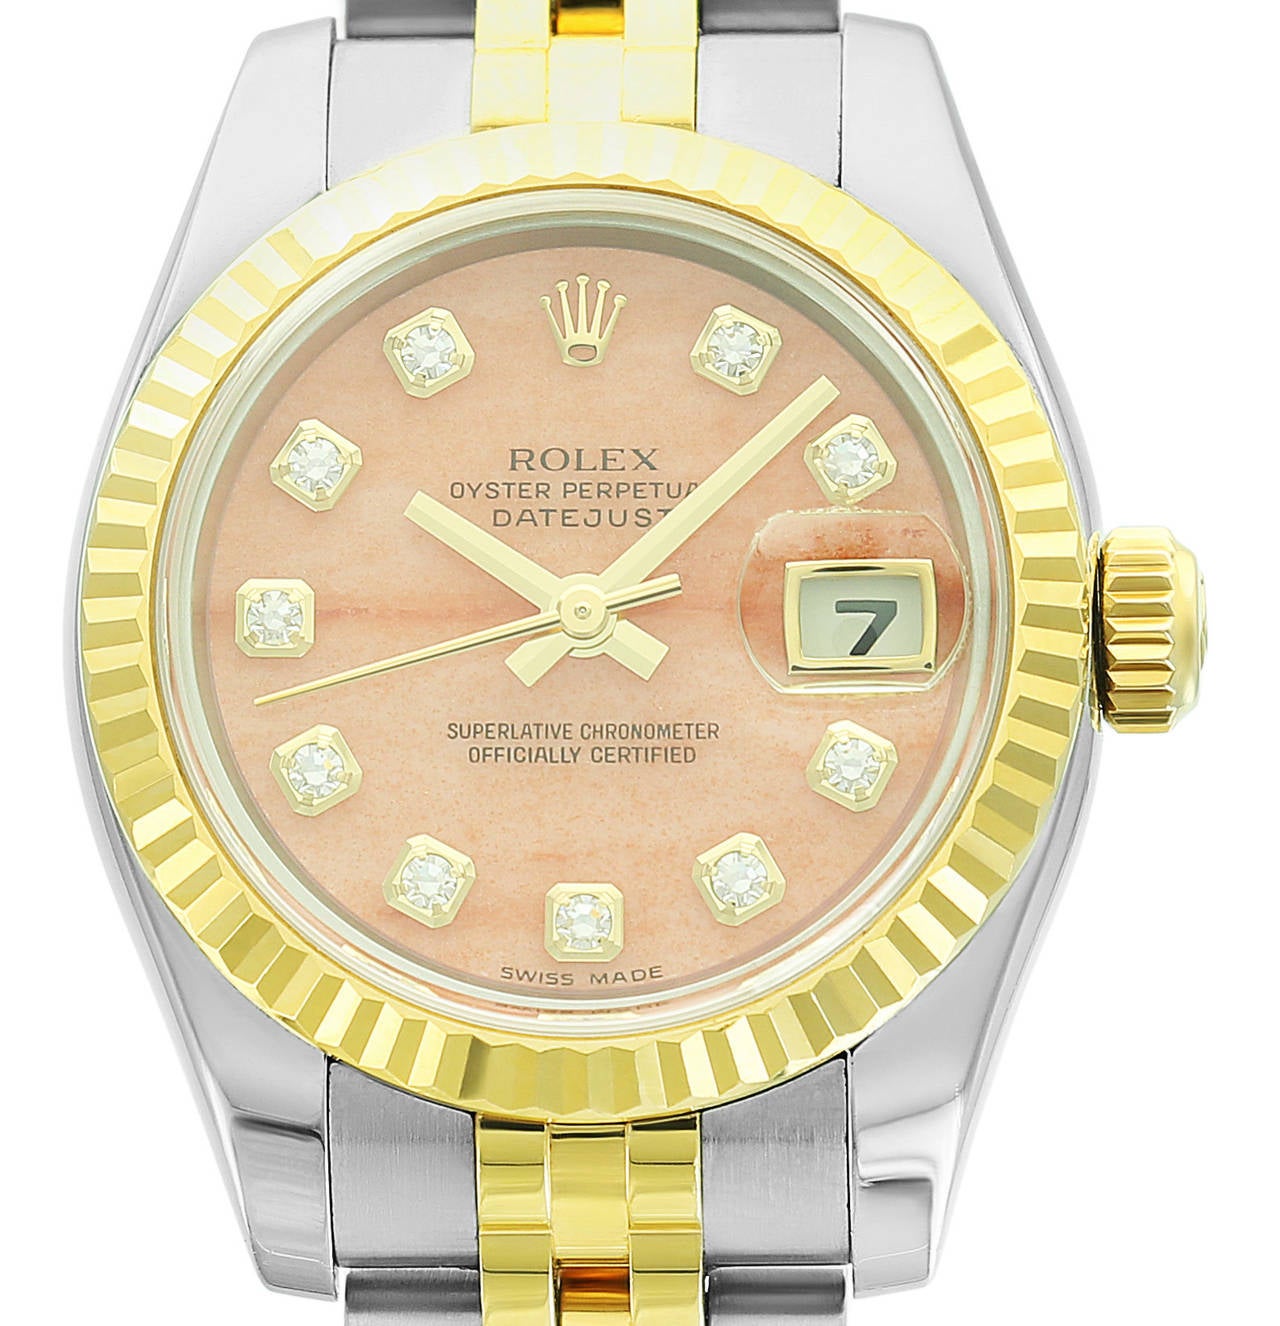 A great edition of a classic model, this two-tone ladies Rolex Datejust features an original coral dial with factory diamond markers. This subtle pop of color and rare dial make this lovely watch a showstopper. It is truly a piece to be worn and